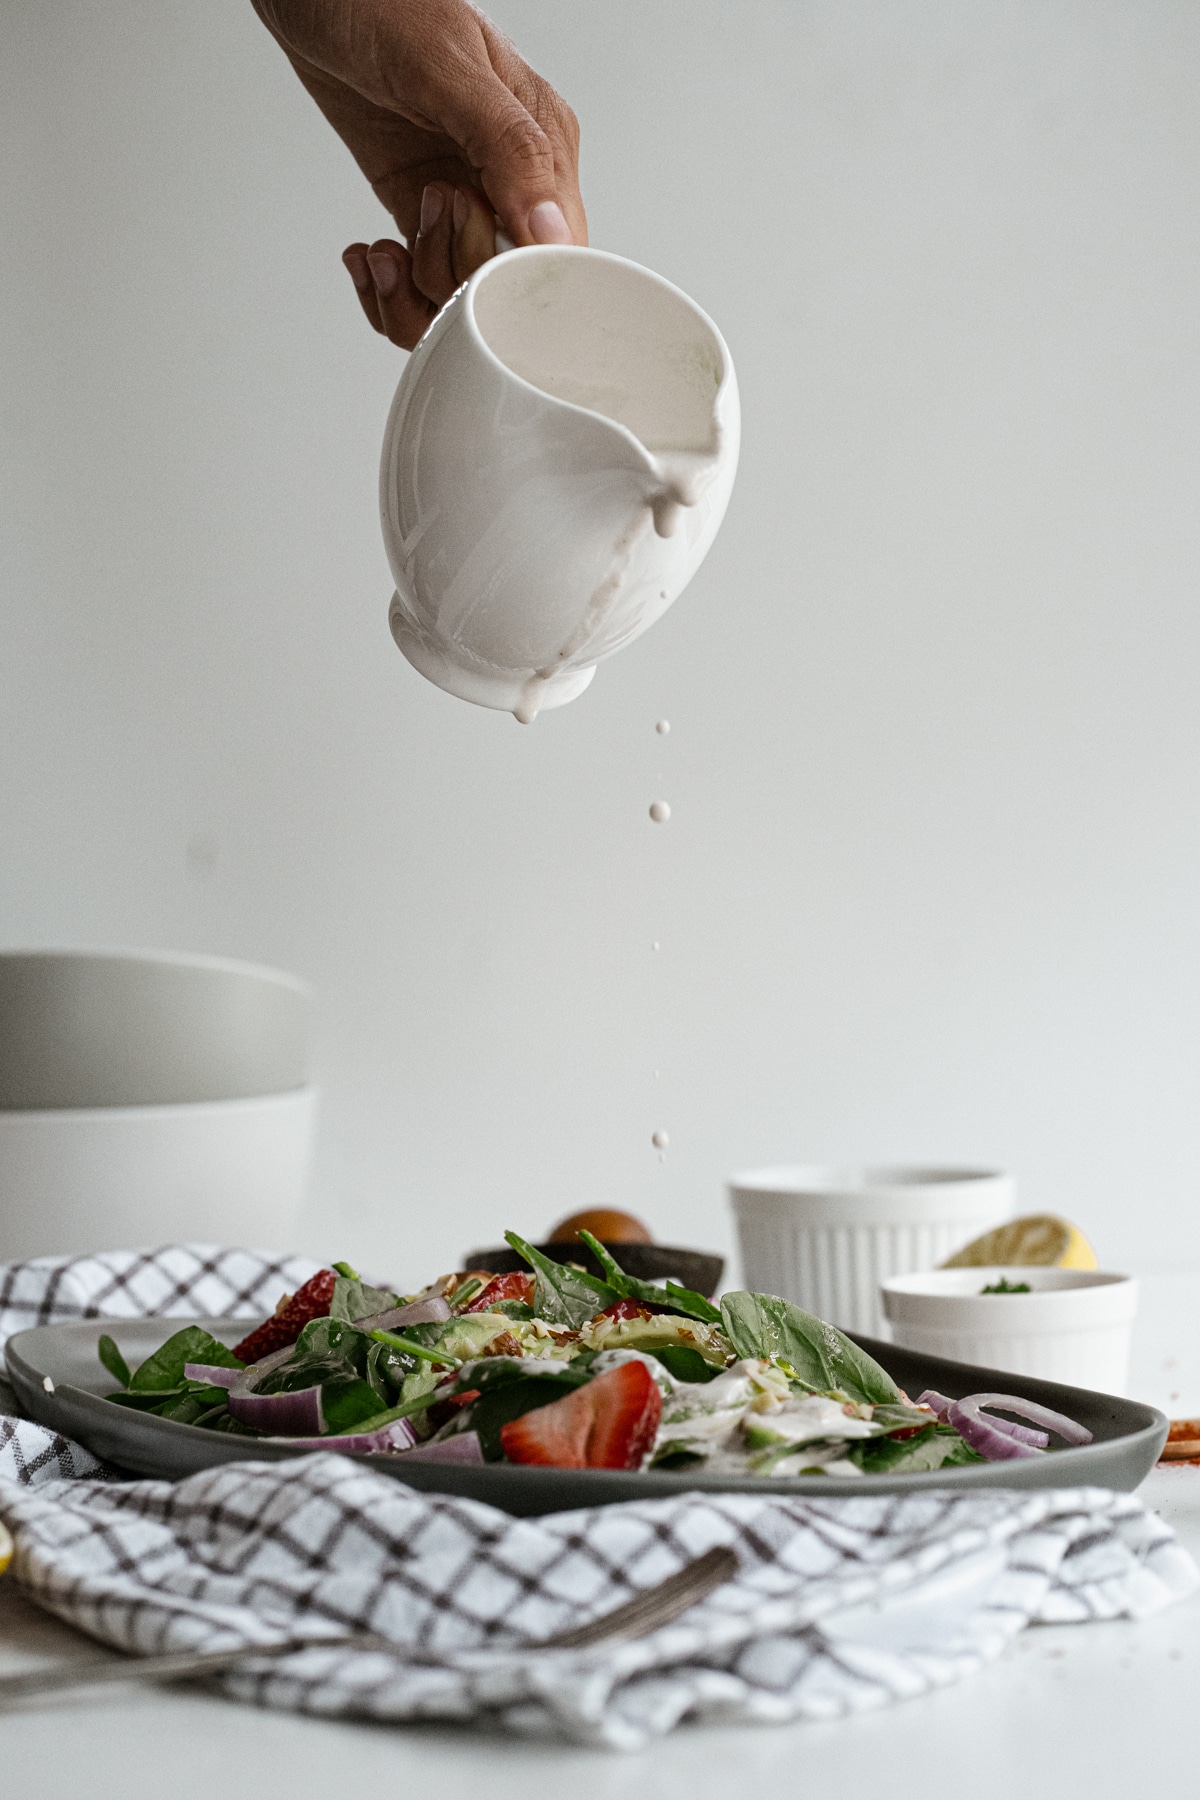 Dressing being poured from a small white pitcher onto strawberry spinach salad.